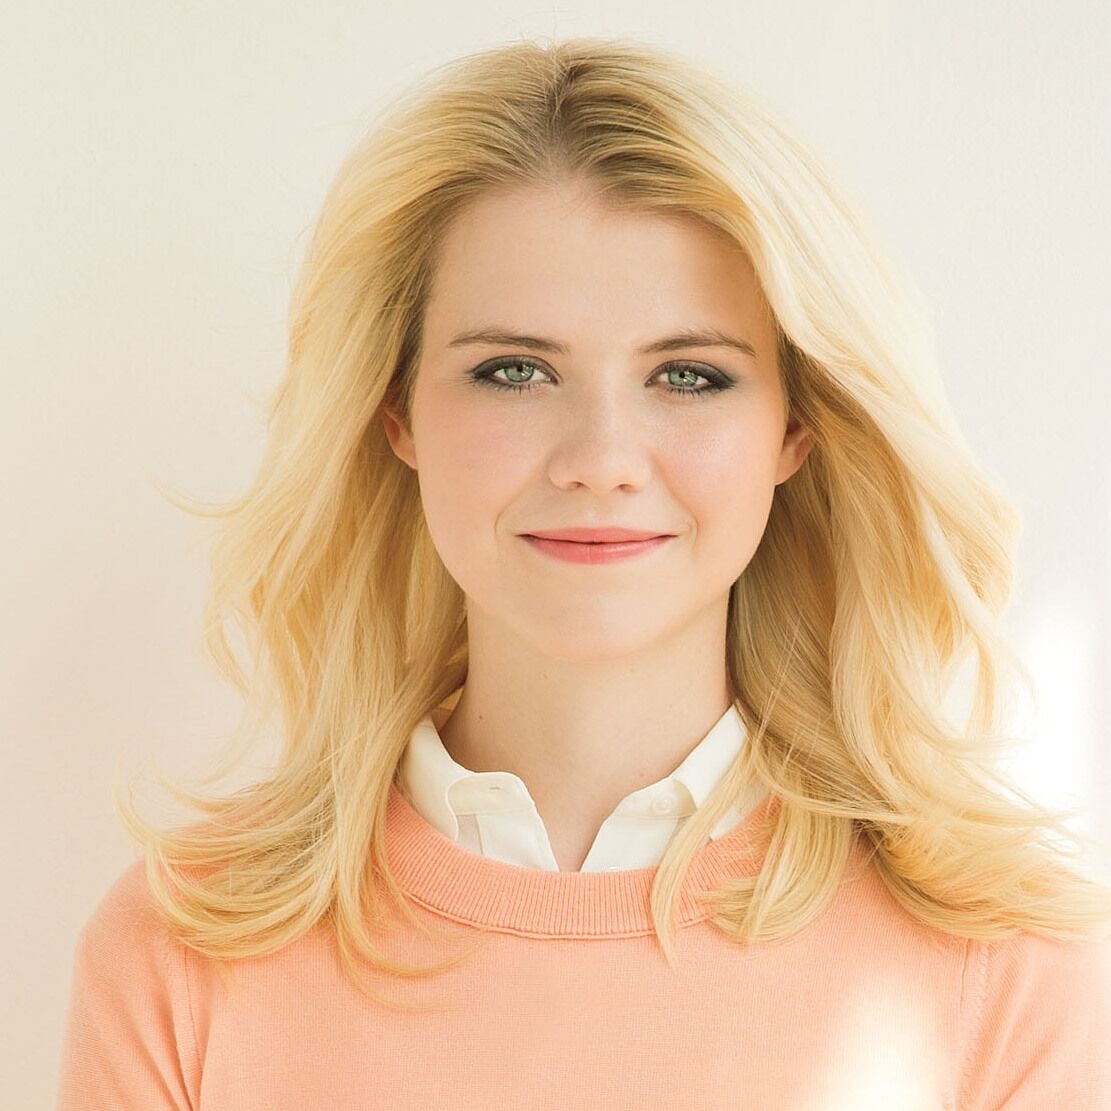 Elizabeth Smart will be the speaker at UNT’s Distinguished Lecture Series Feb. 9.